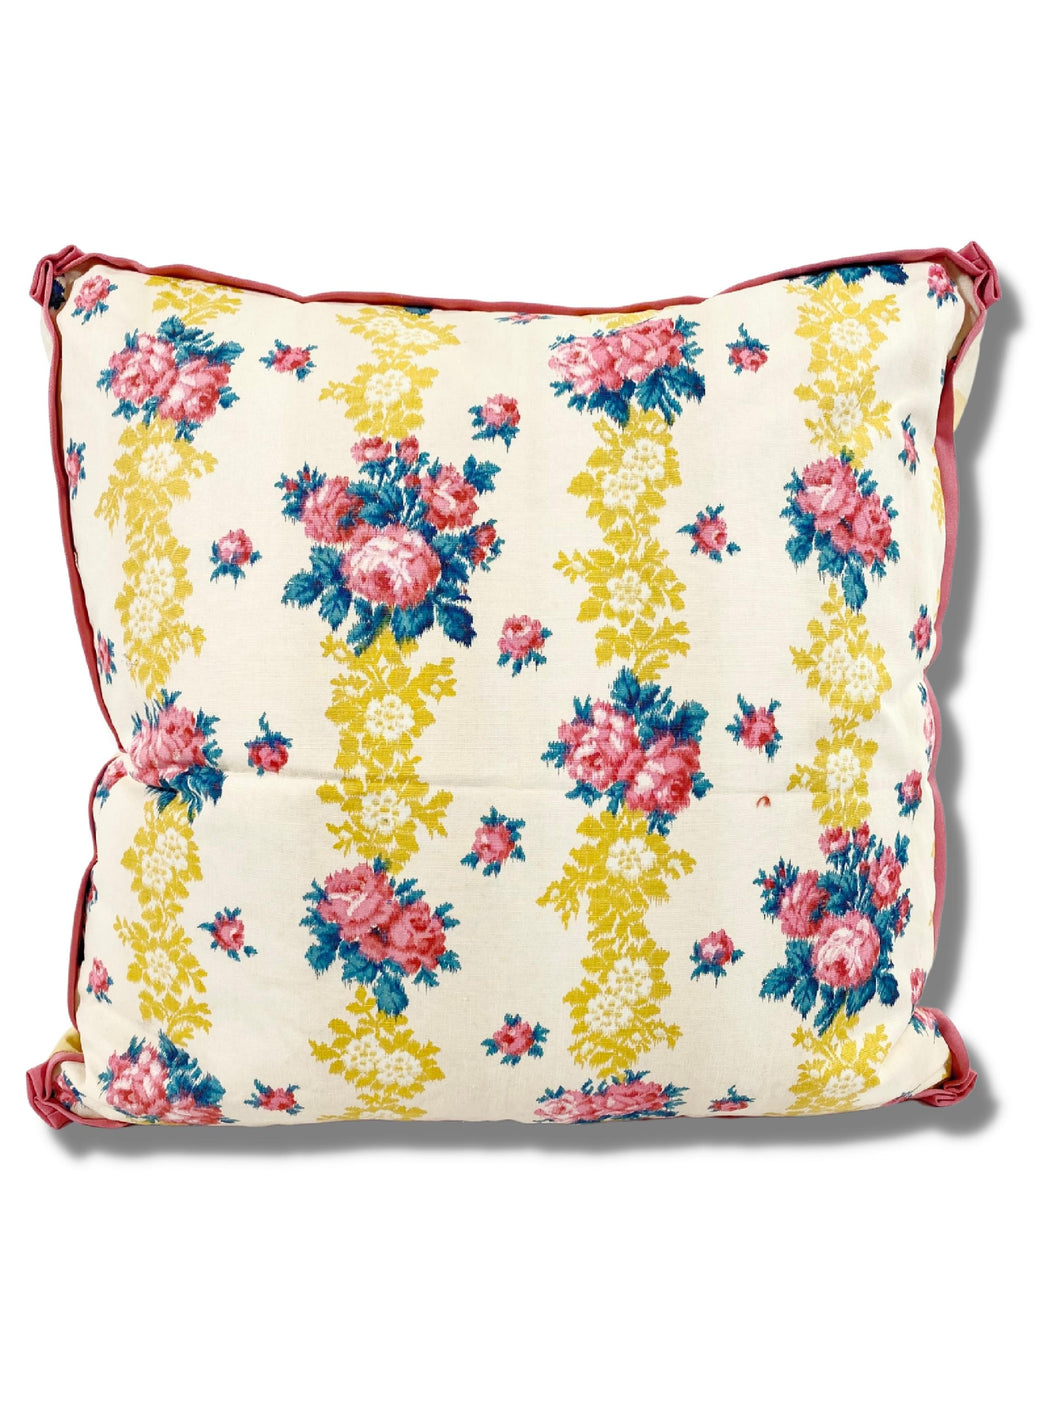 Floral Pillows in Antique French Cotton (Pair)